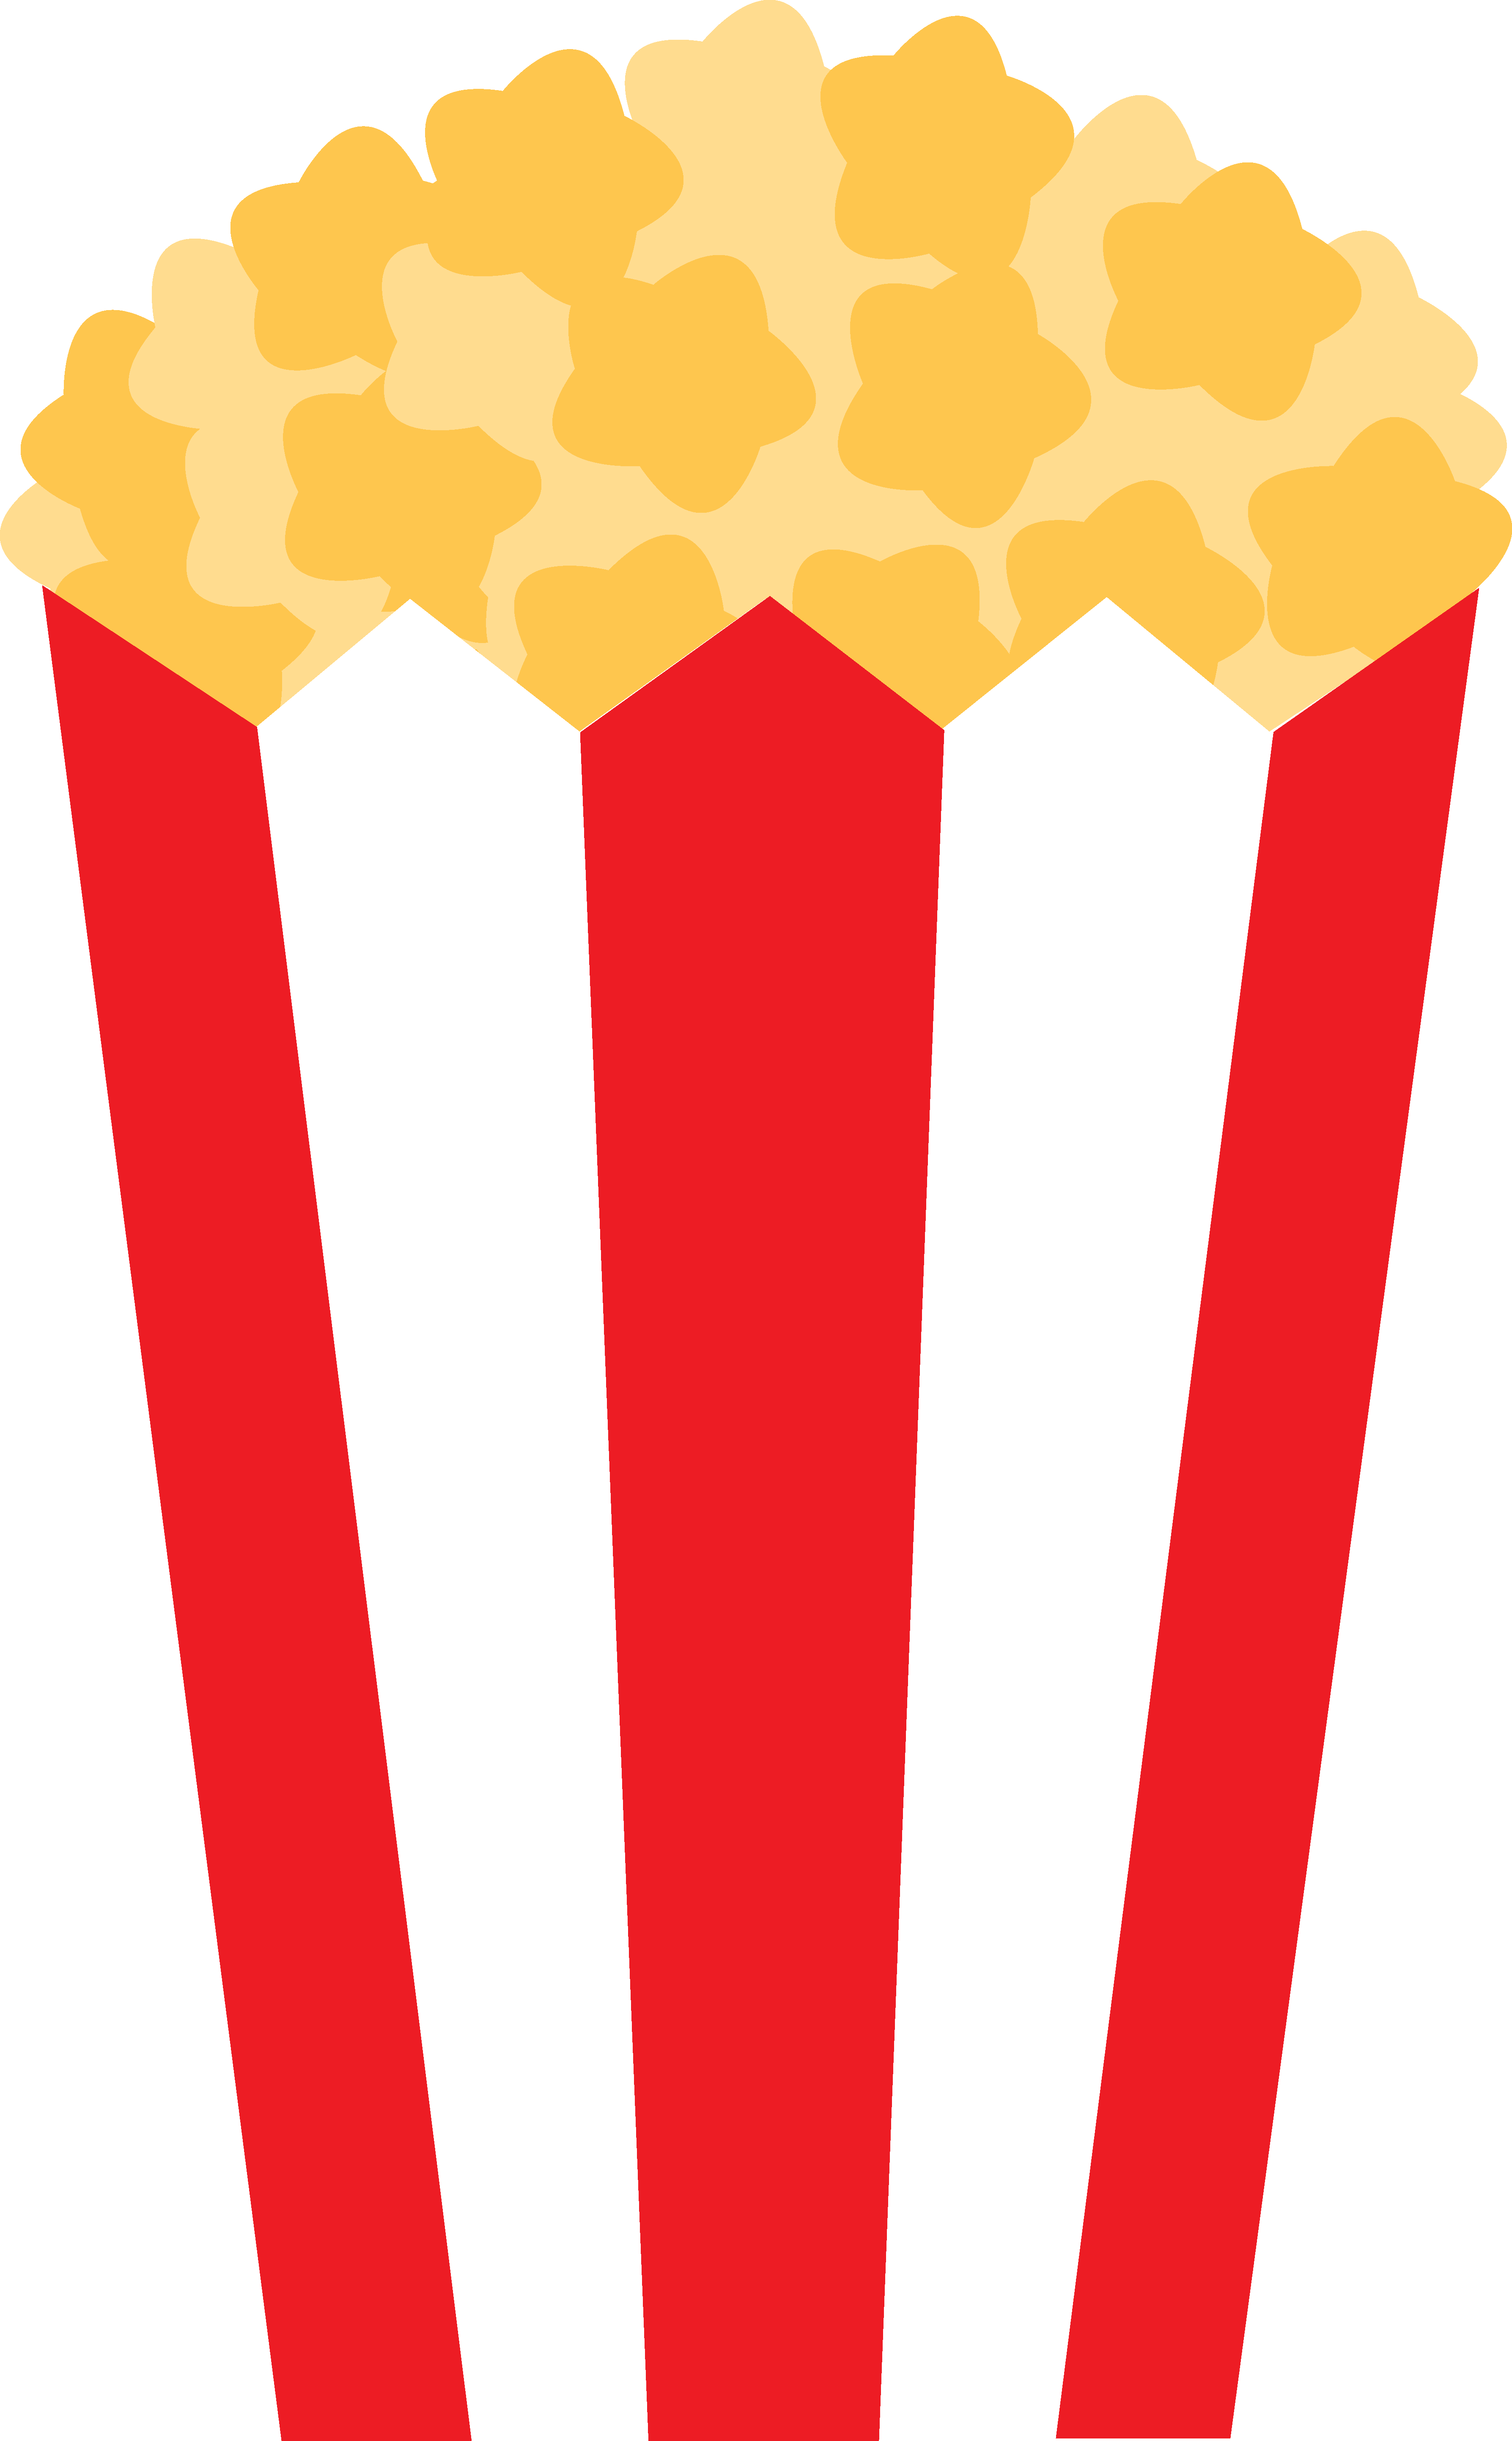 Popcorn clipart border free clipart images